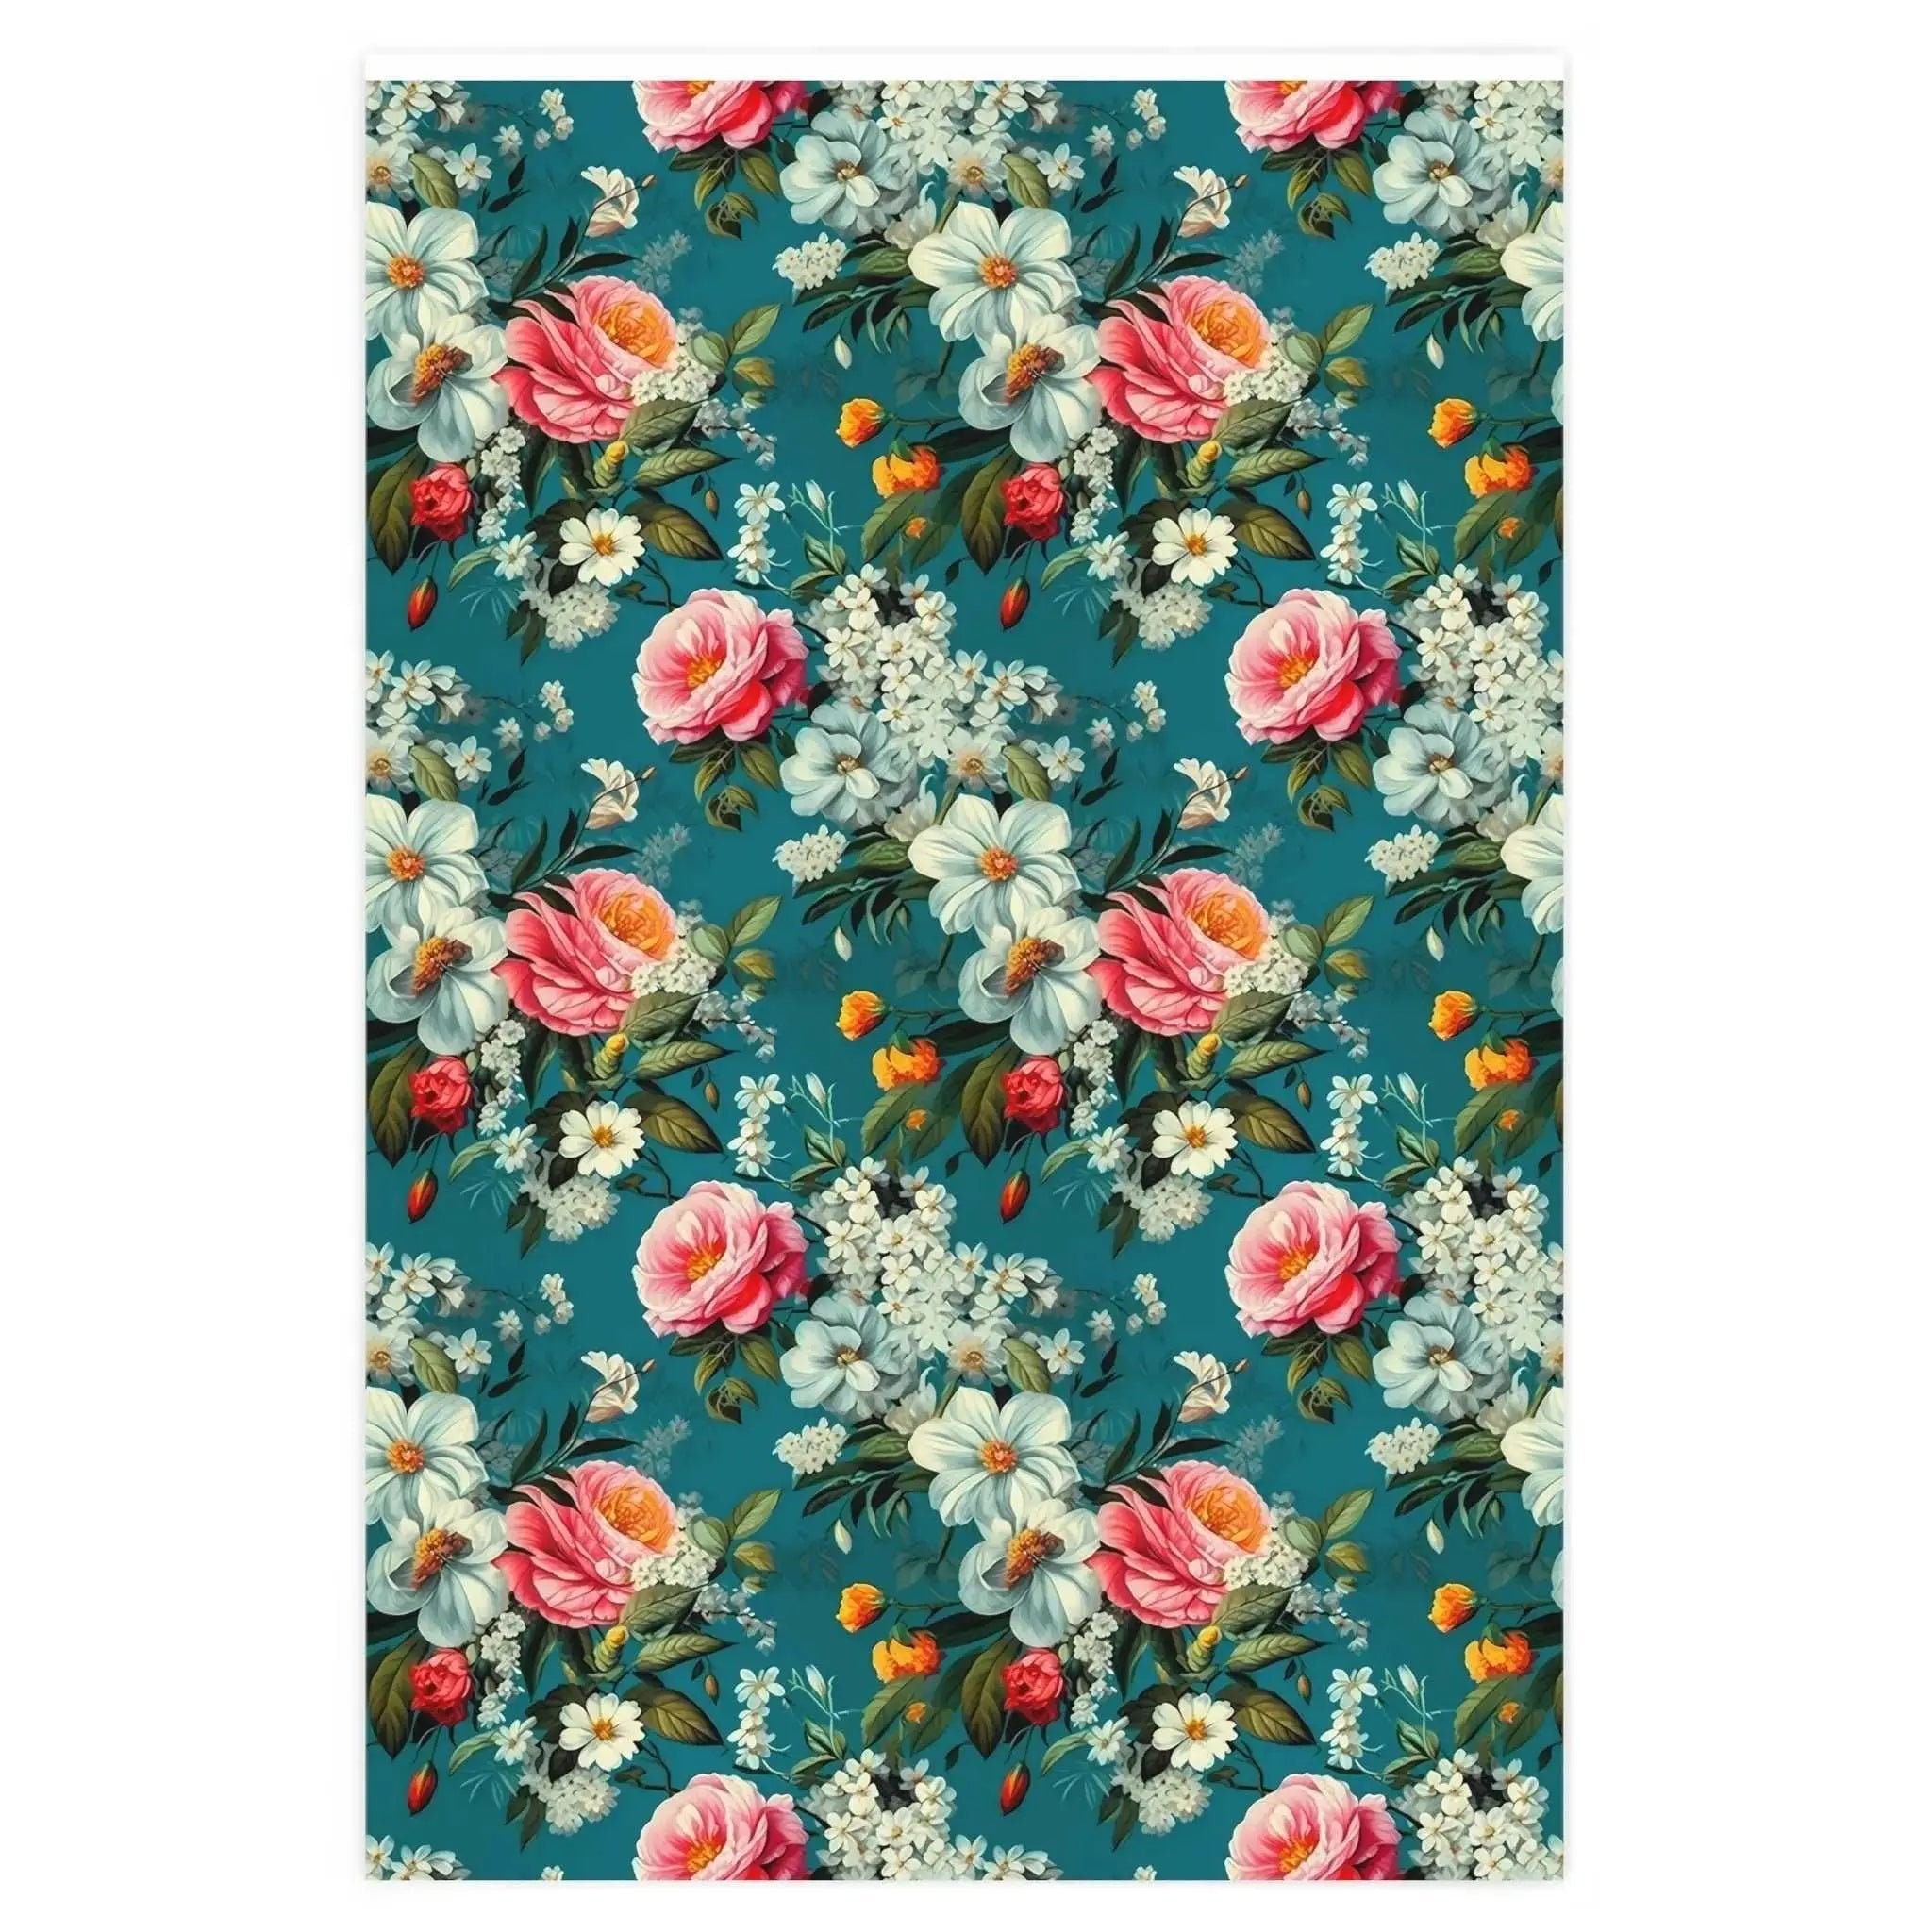 Cottagecore Granny-Chic Floral Wrapping Paper Rolls - The Curated Goose